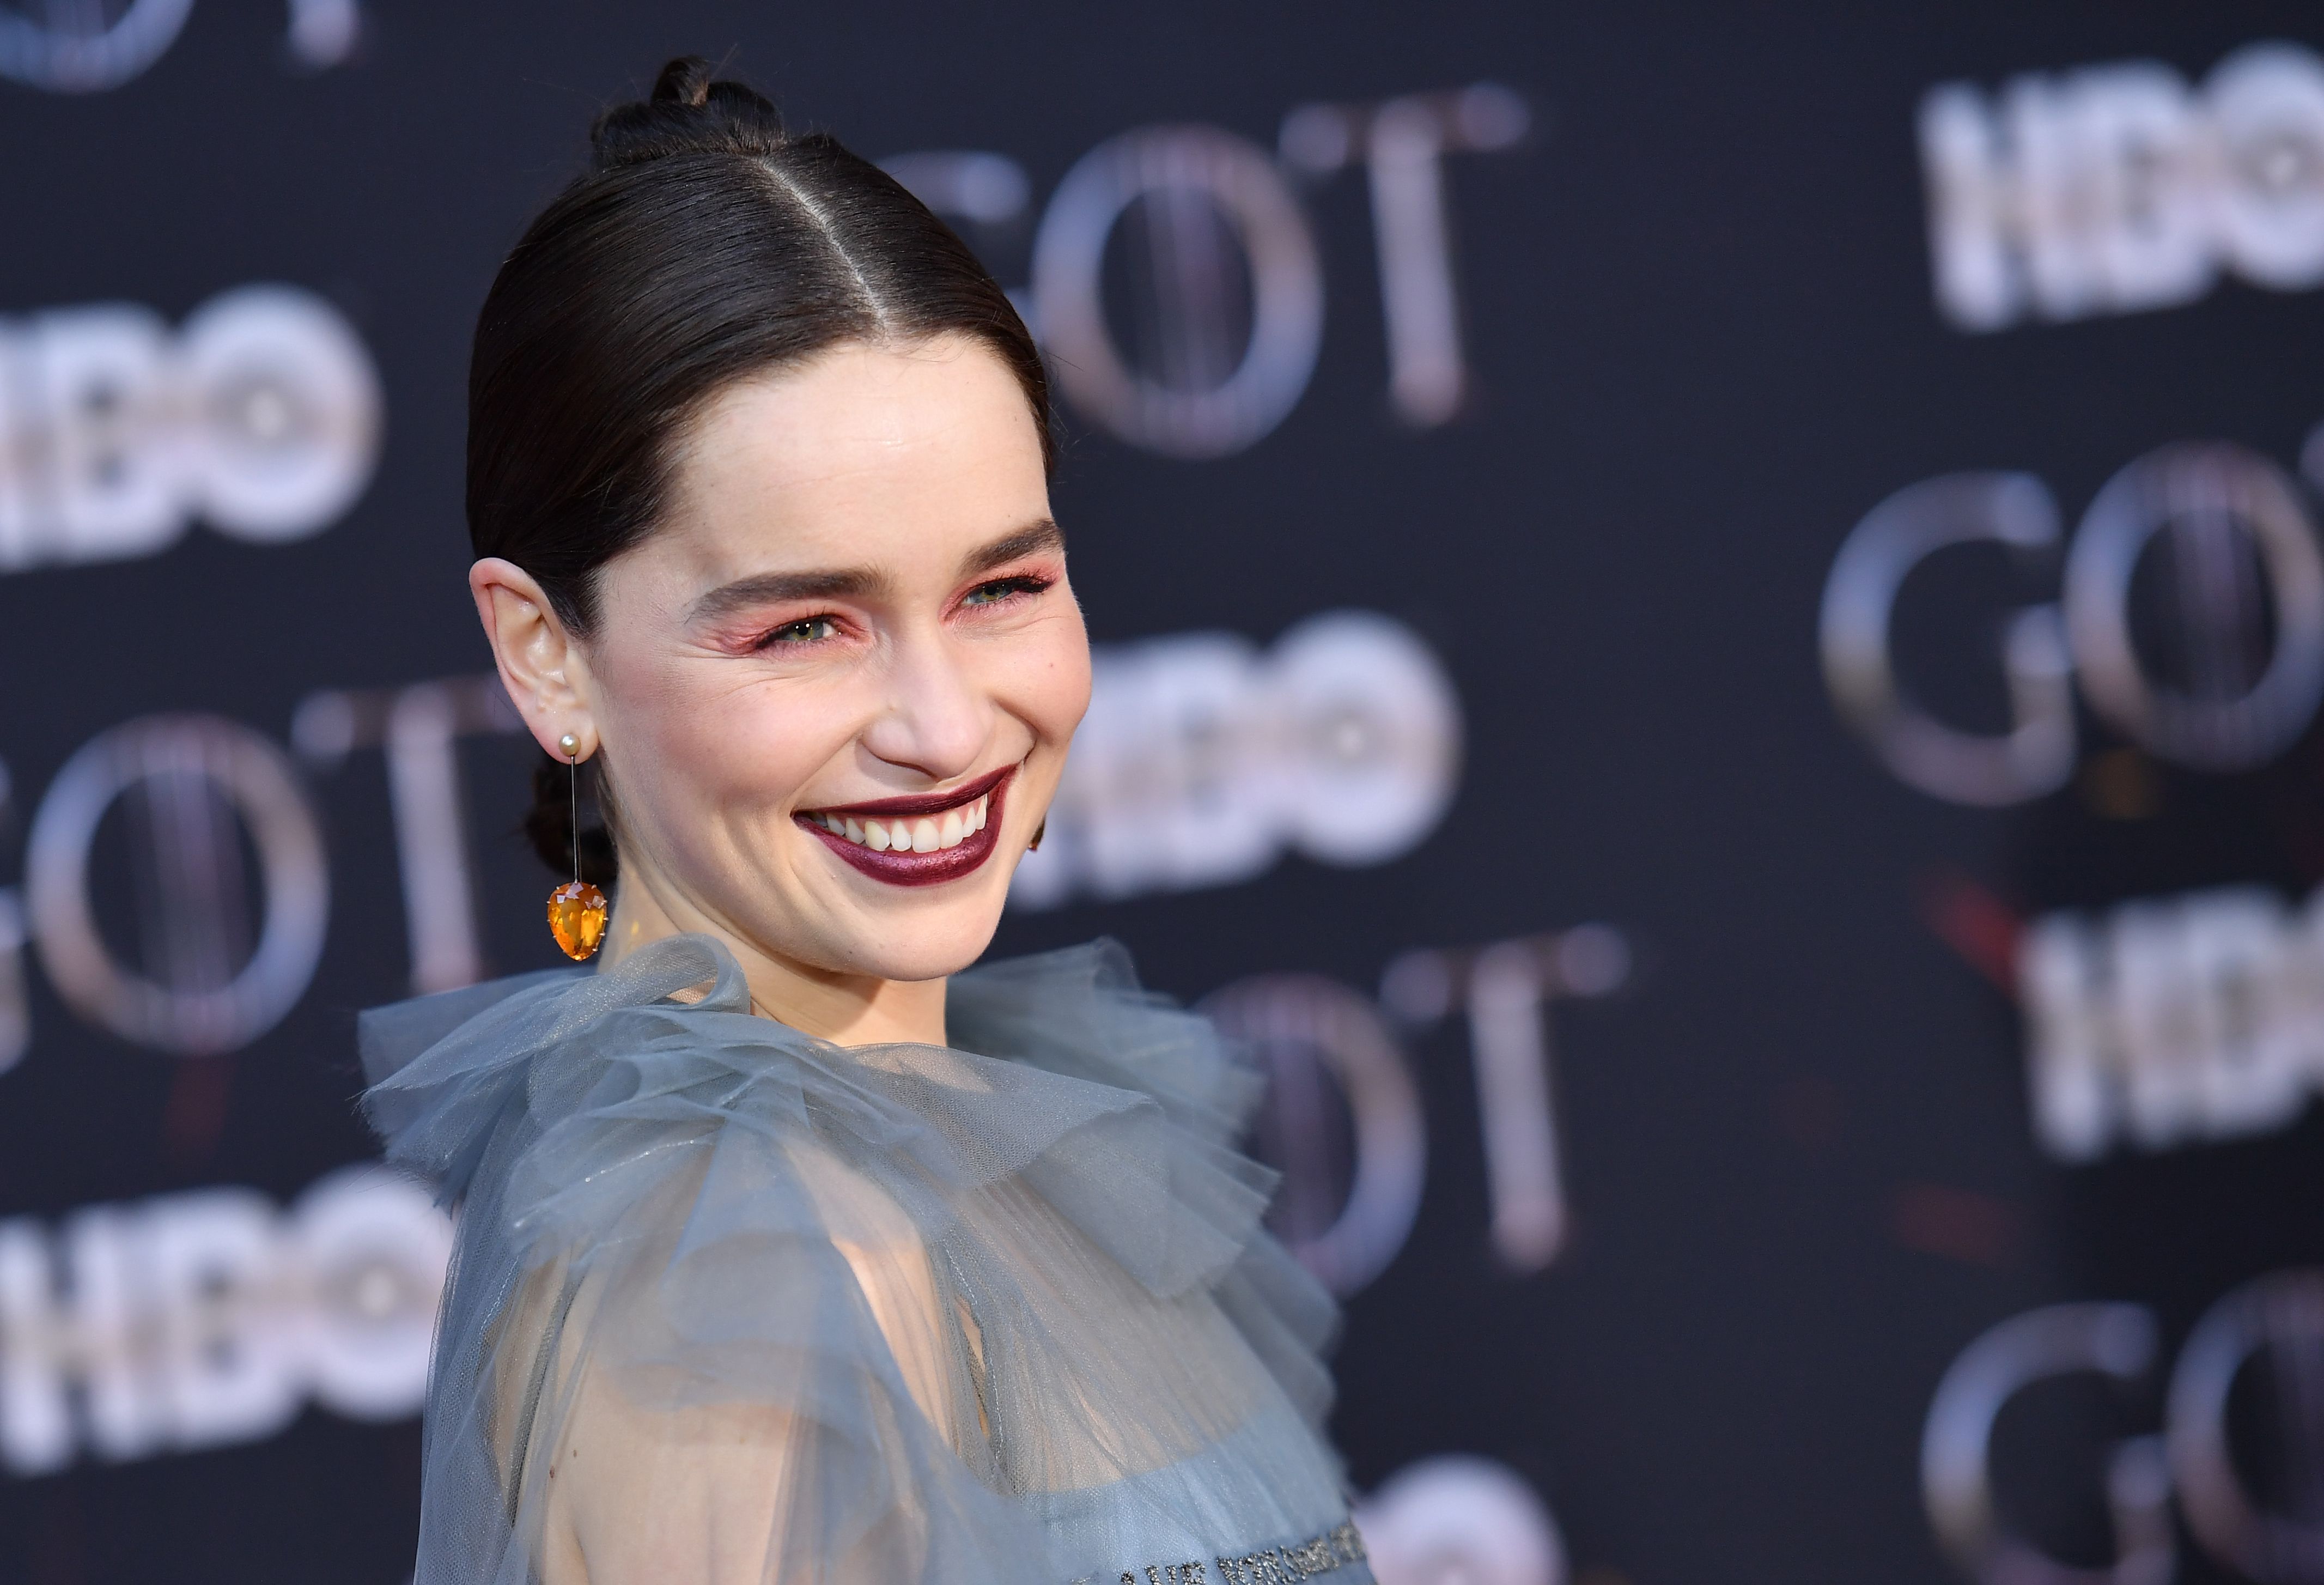 Emilia Clarke poses in front of a 'Game of Thrones' step and repeat